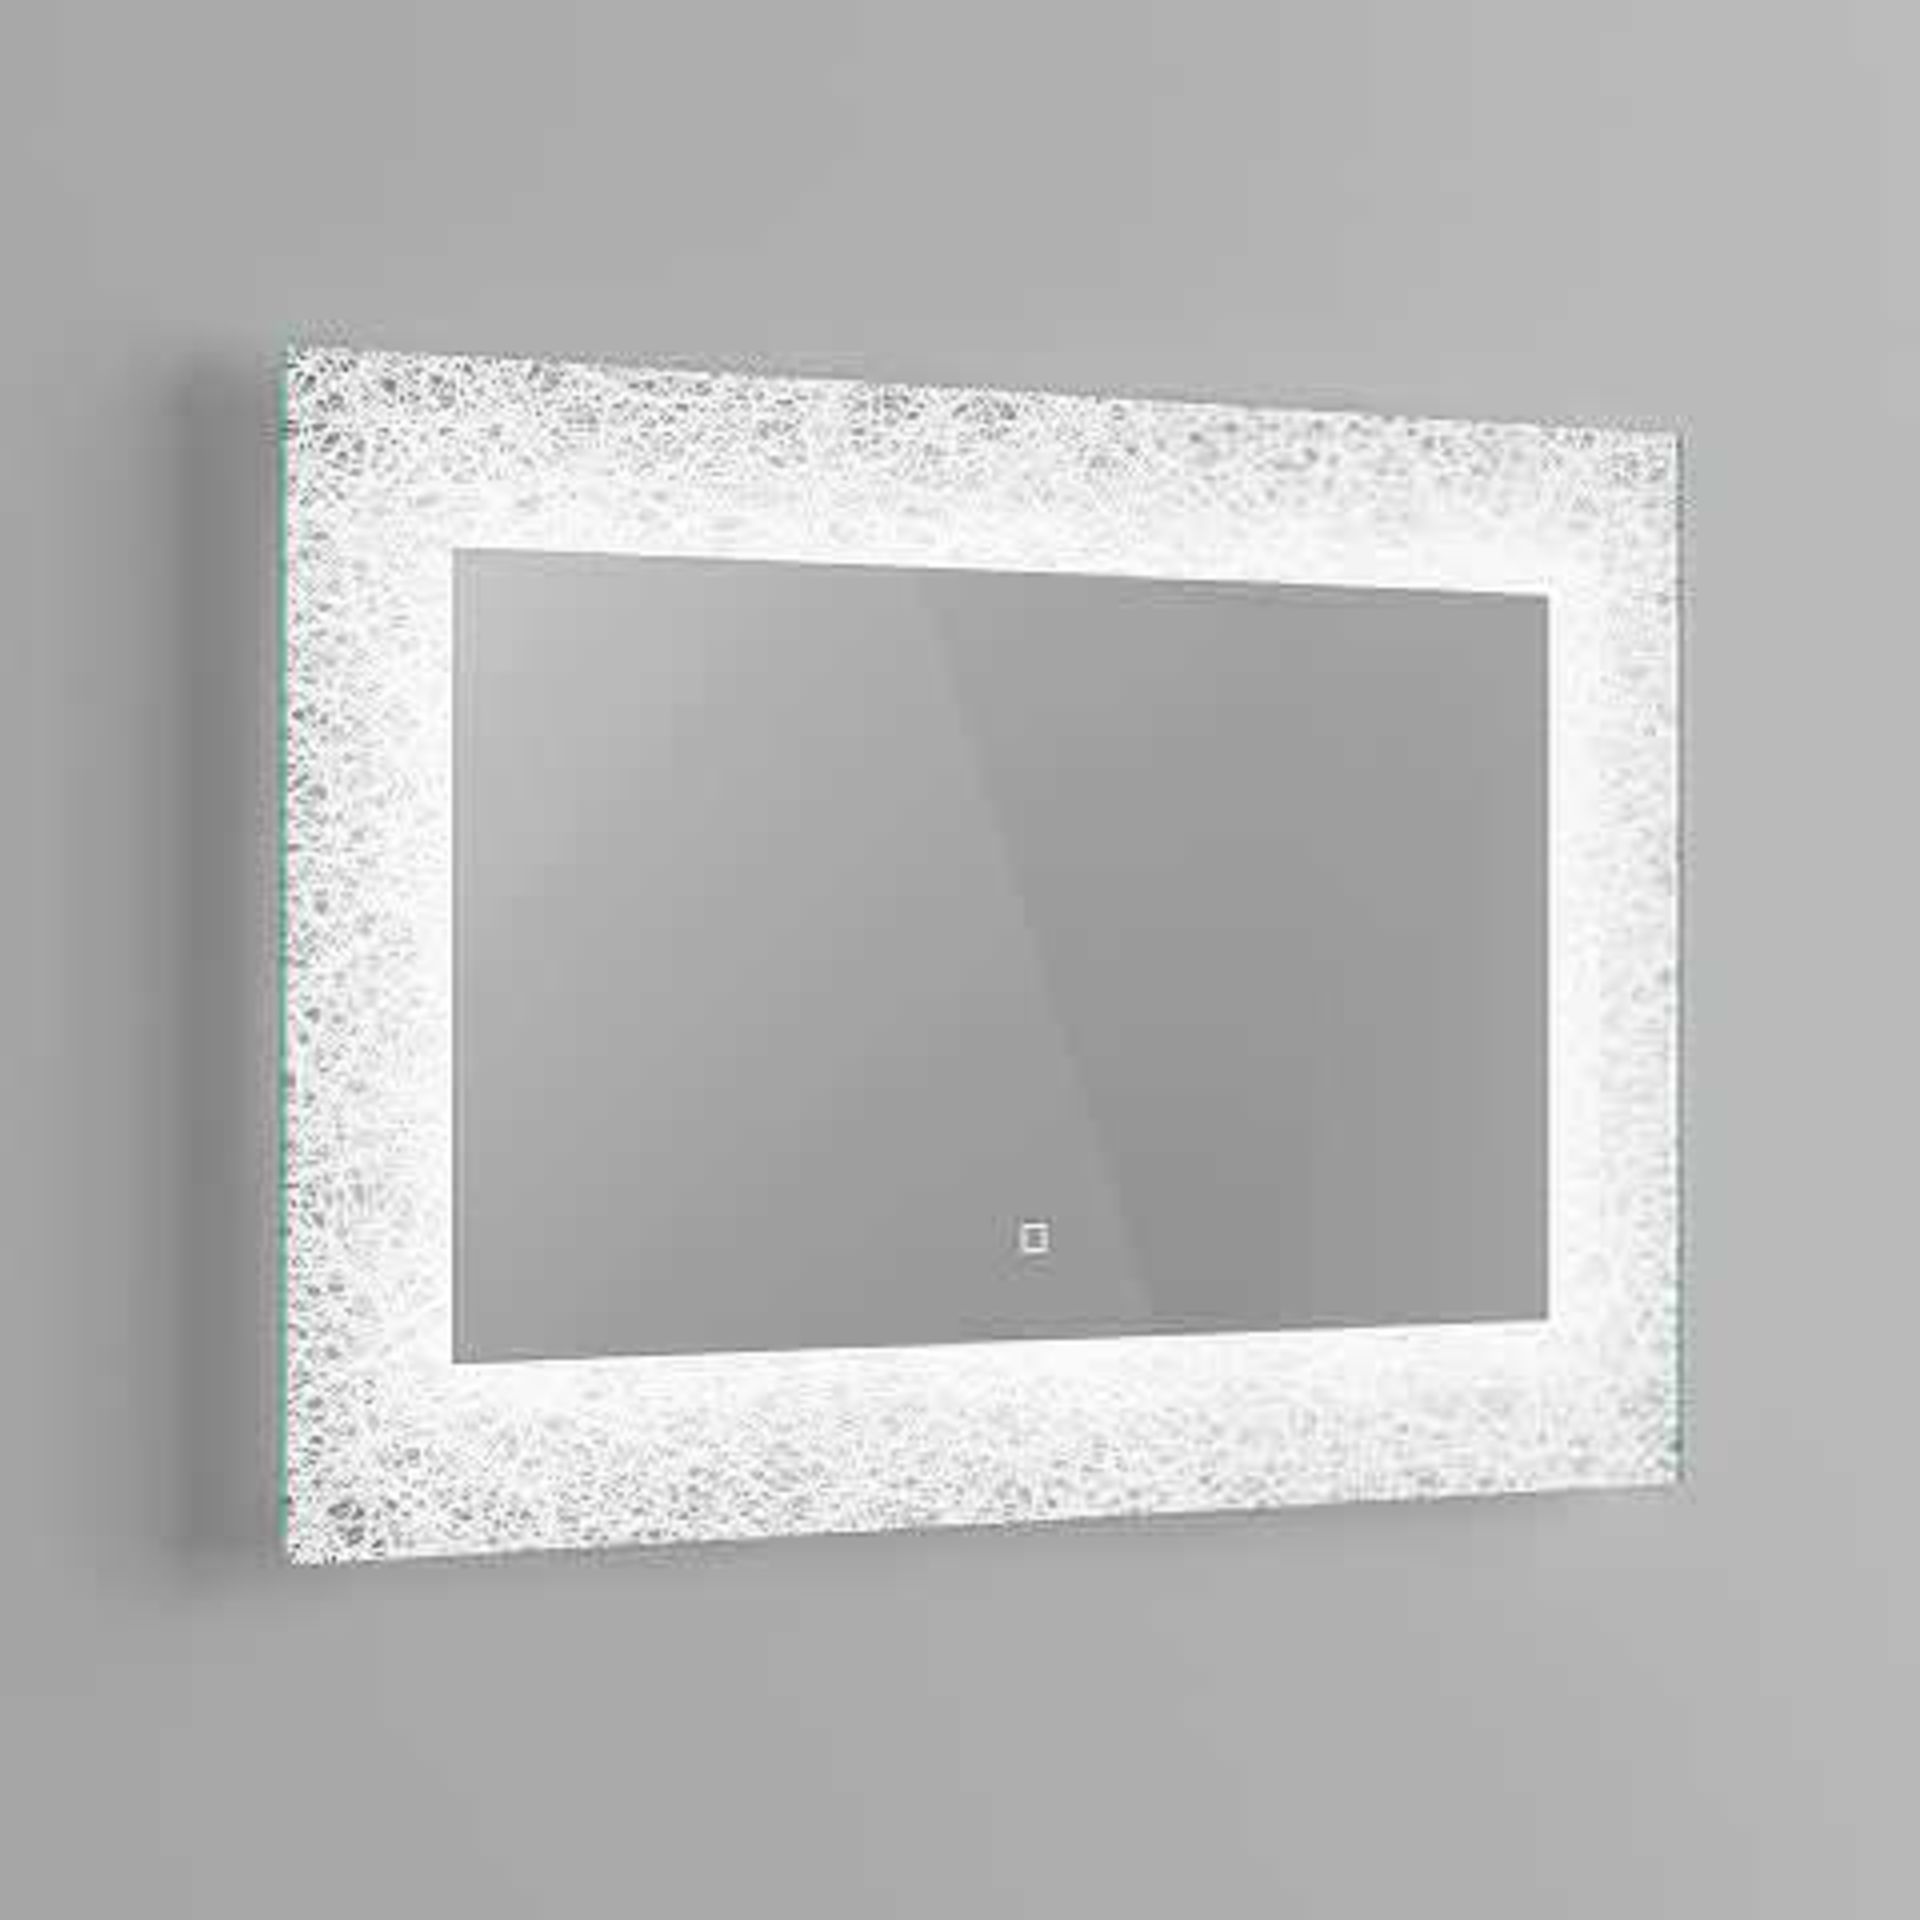 (M2) 600x900mm Galactic Designer Illuminated LED Mirror - Switch Control Light up your bathroom with - Image 2 of 4